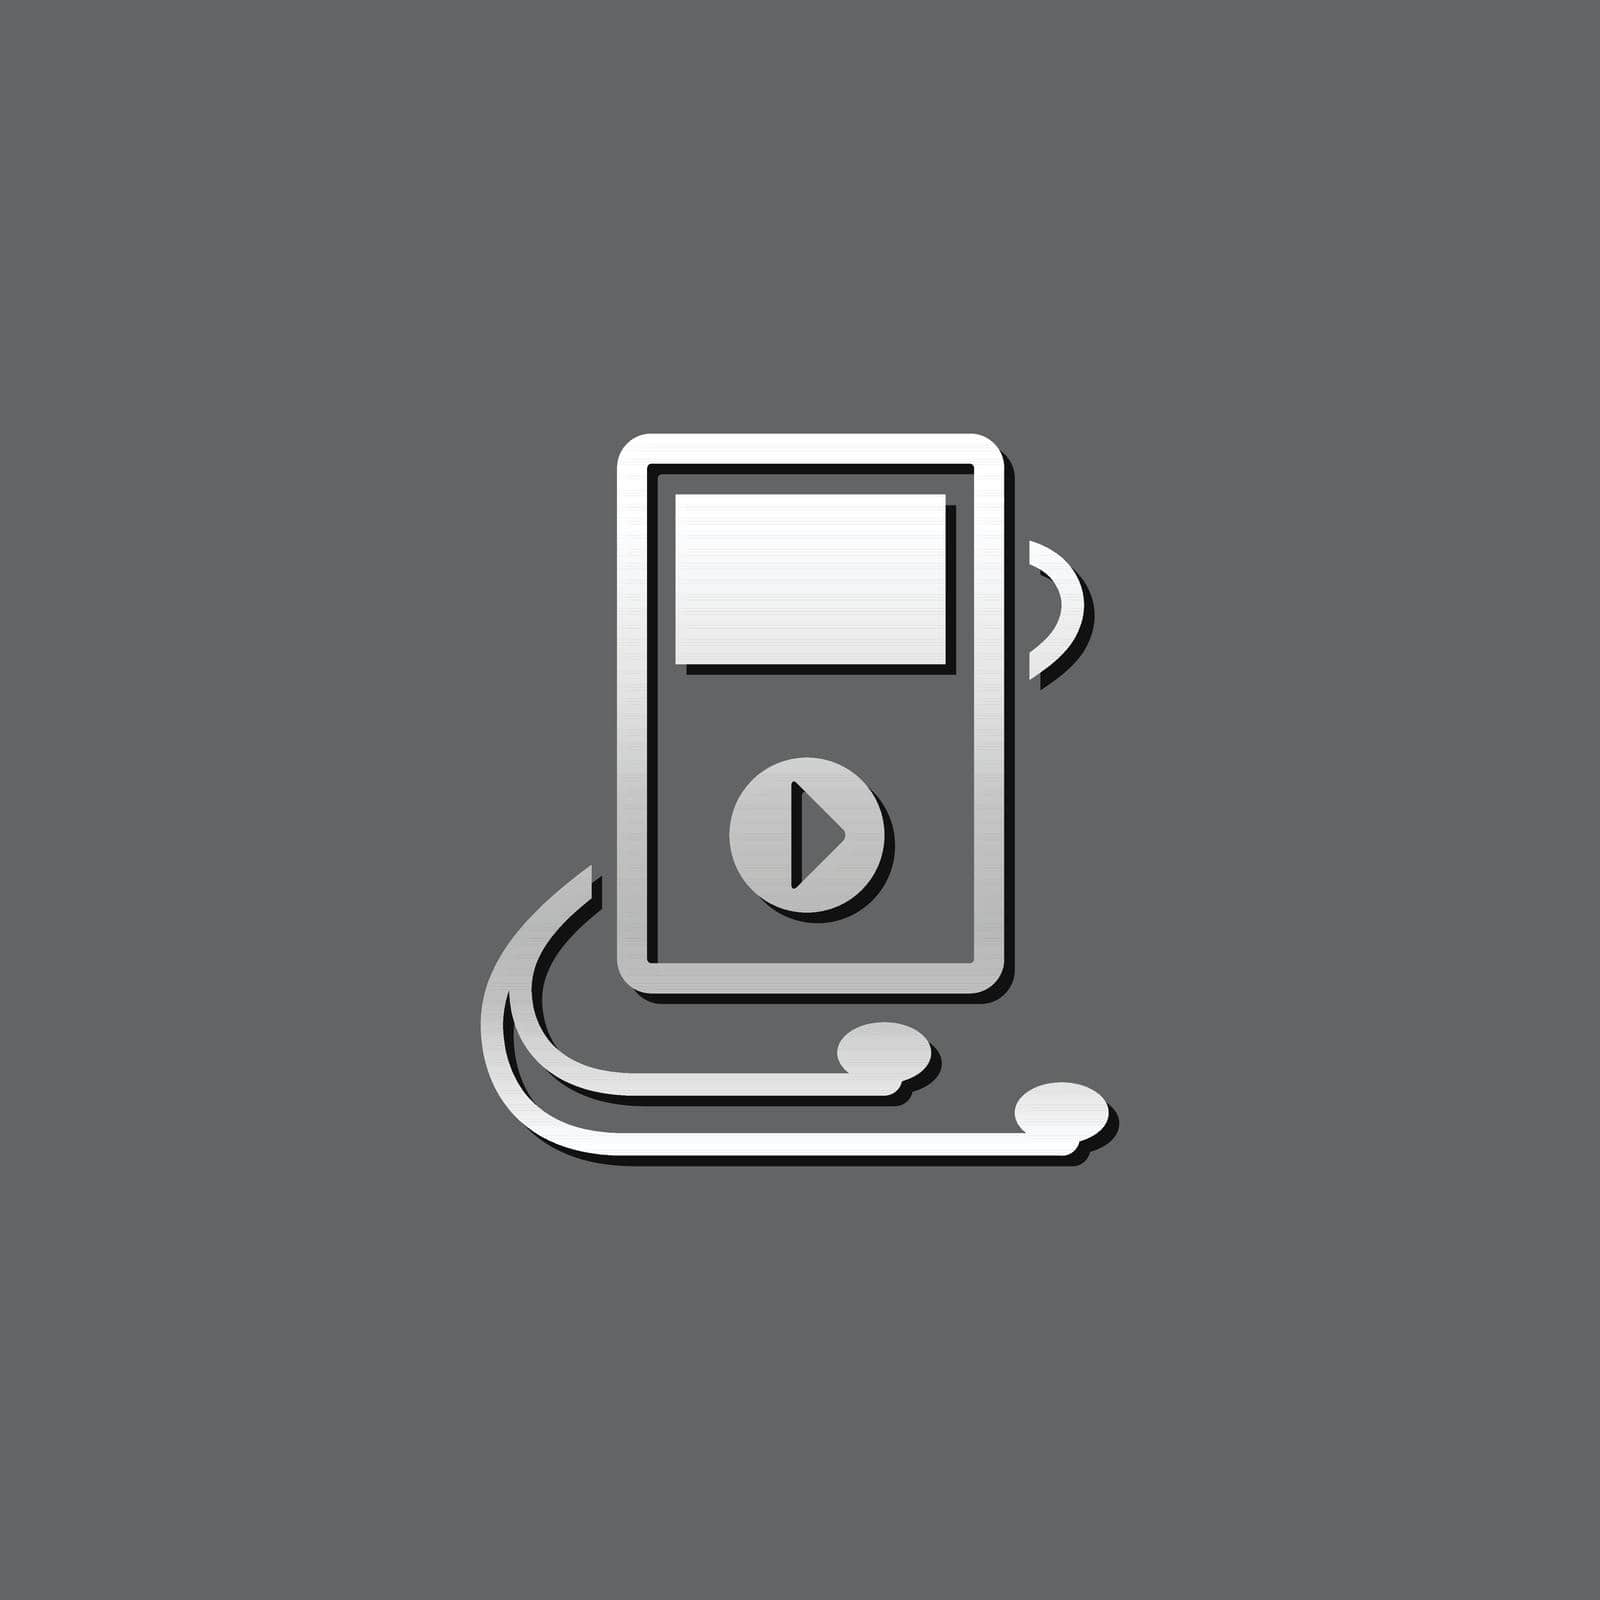 Music player icon in metallic grey color style. Electronic entertainment